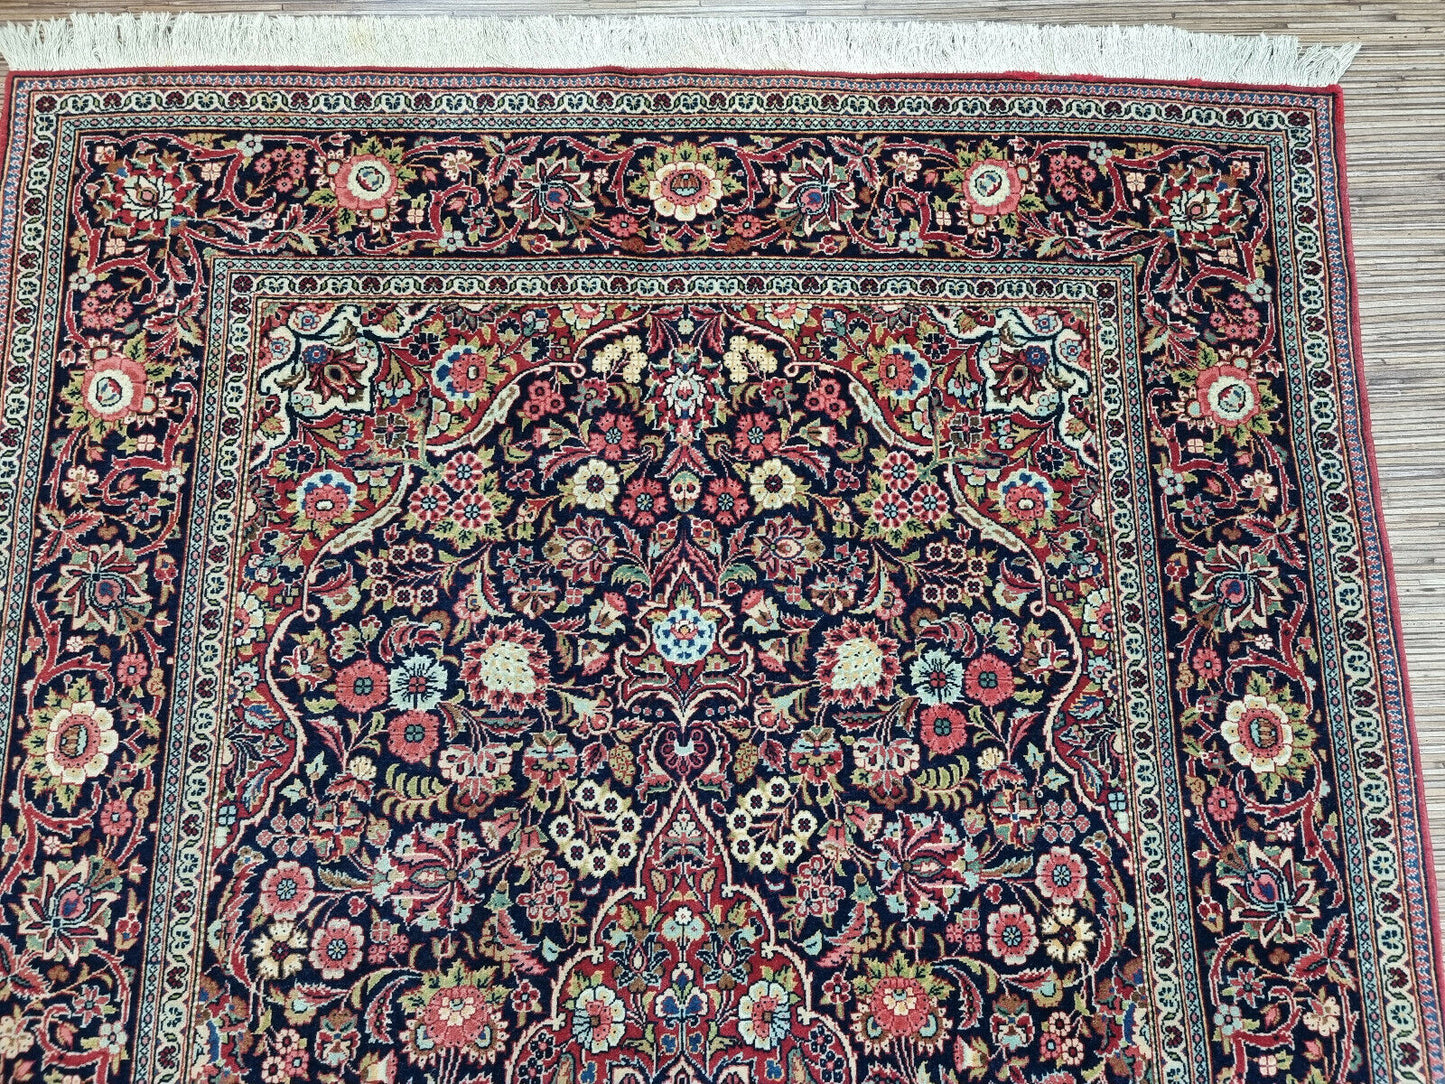 Close-up of intricate border patterns on Handmade Antique Persian Kashan Rug - Detailed view highlighting the complexity of the border patterns.